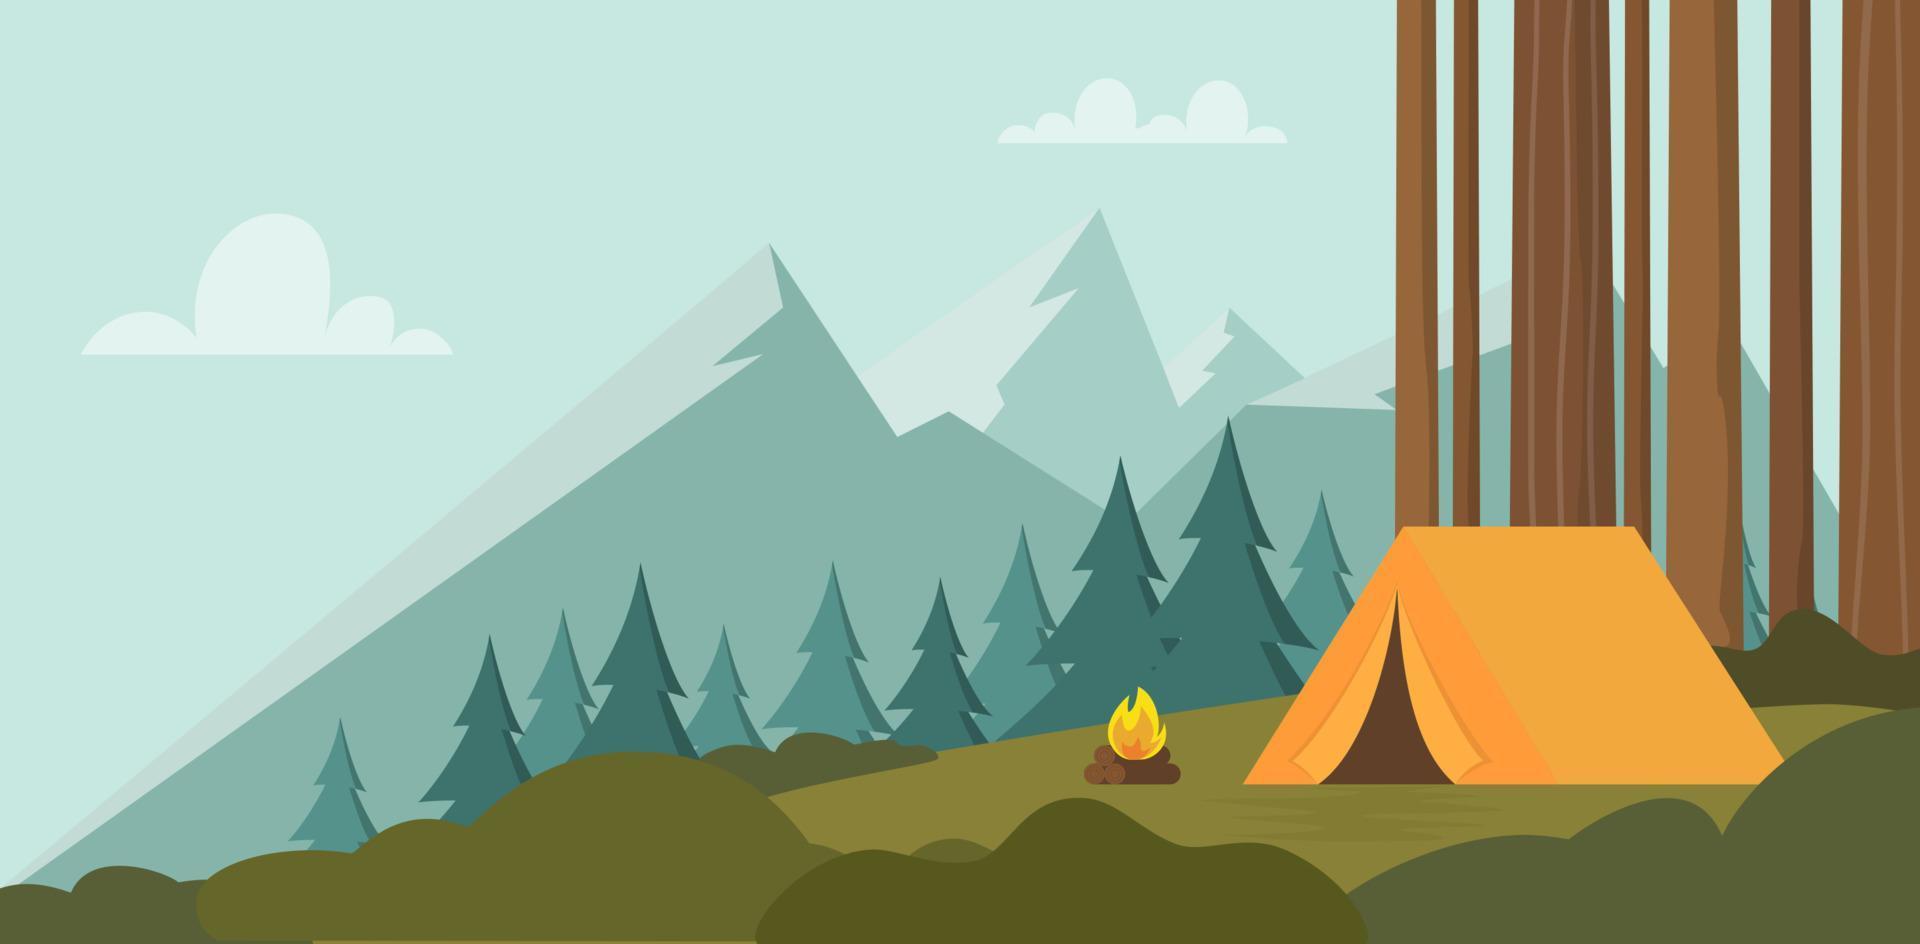 Landscape with forest campsite against mountains in background. Orange tent in forest. Banner, poster for Climbing, hiking, trakking sport, adventure tourism, travel, backpacking. Vector illustration.